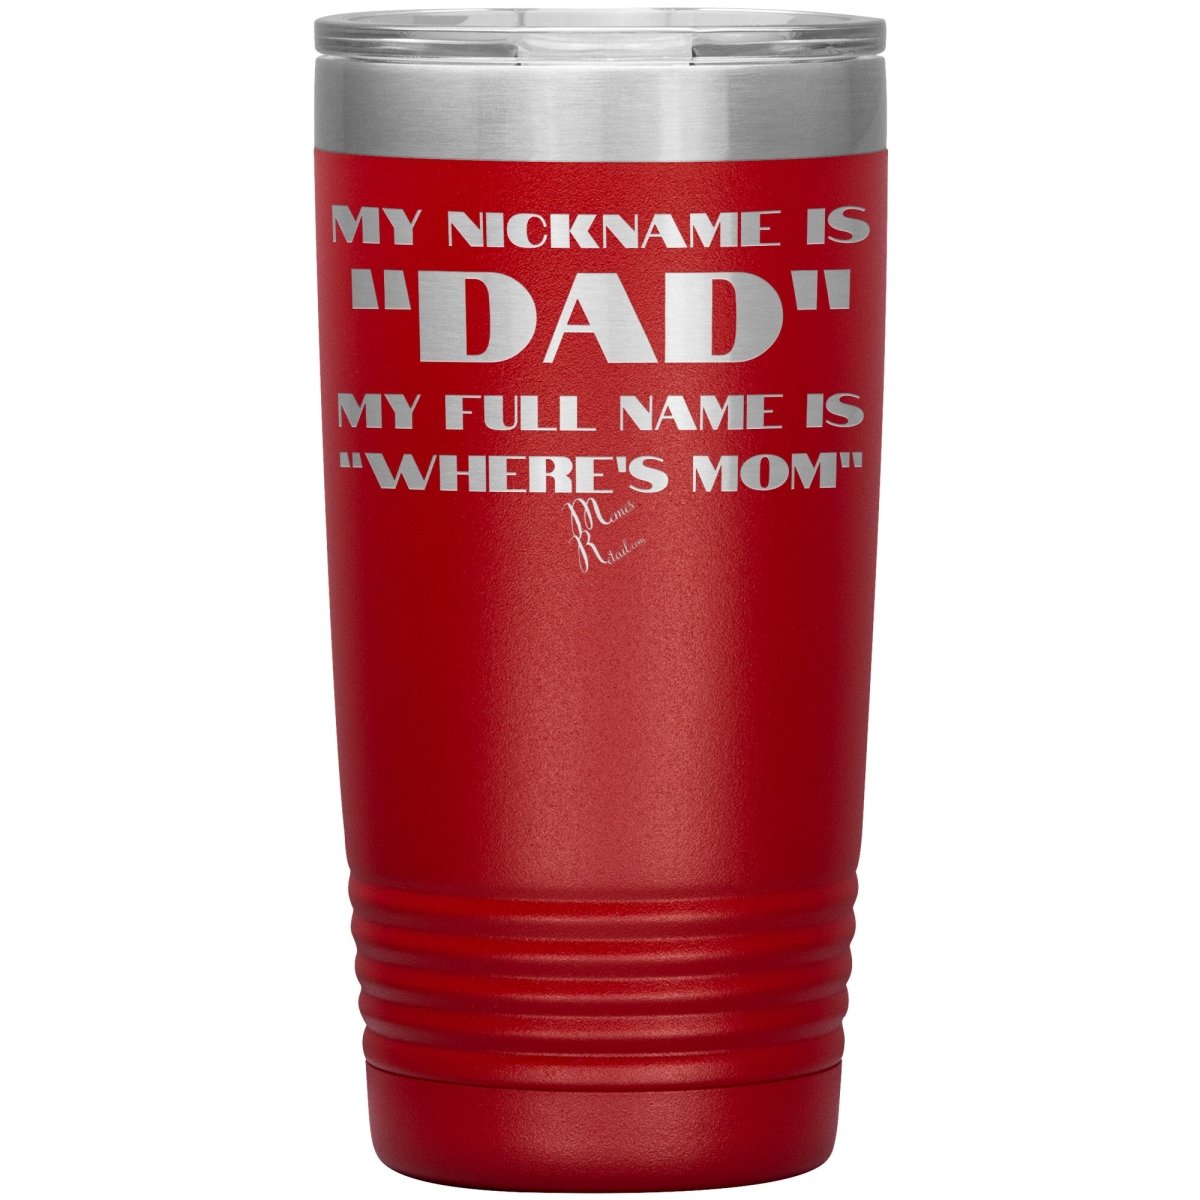 My Nickname is "Dad", My Full Name is "Where's Mom" Tumblers, 20oz Insulated Tumbler / Red - MemesRetail.com